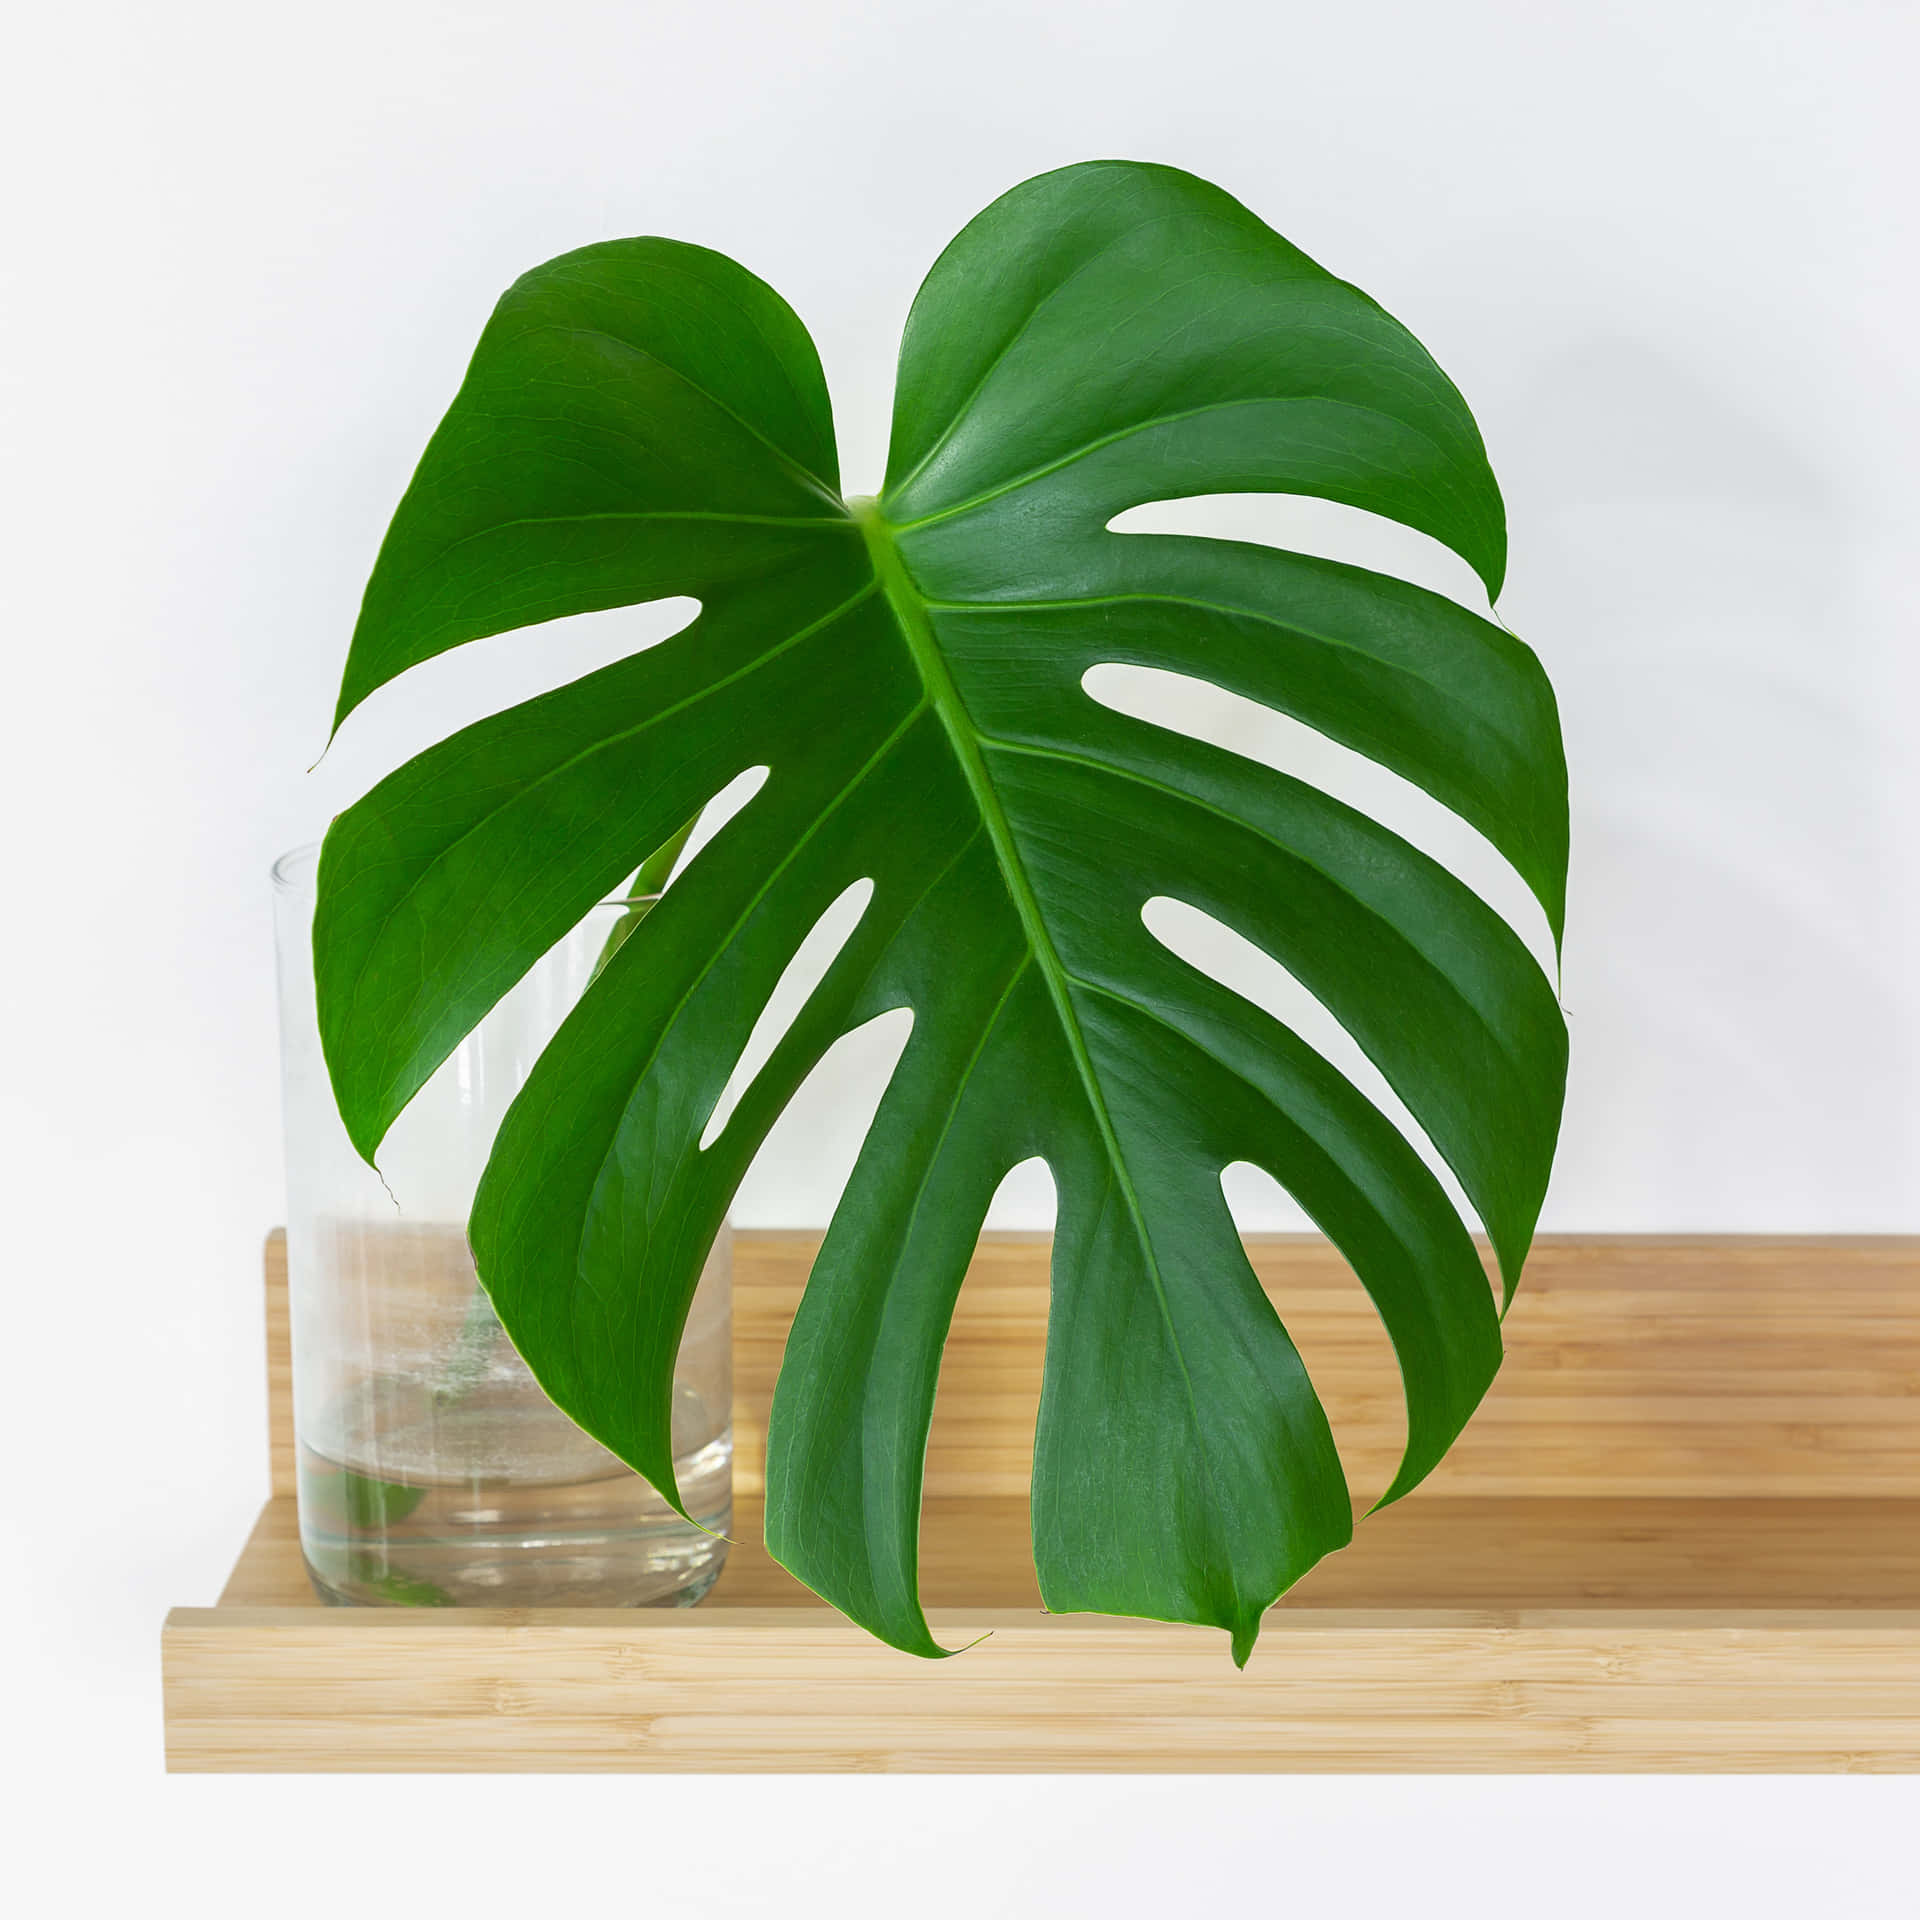 Start your week with a boost of colour and nature with this beautiful Monstera Monday wallpaper